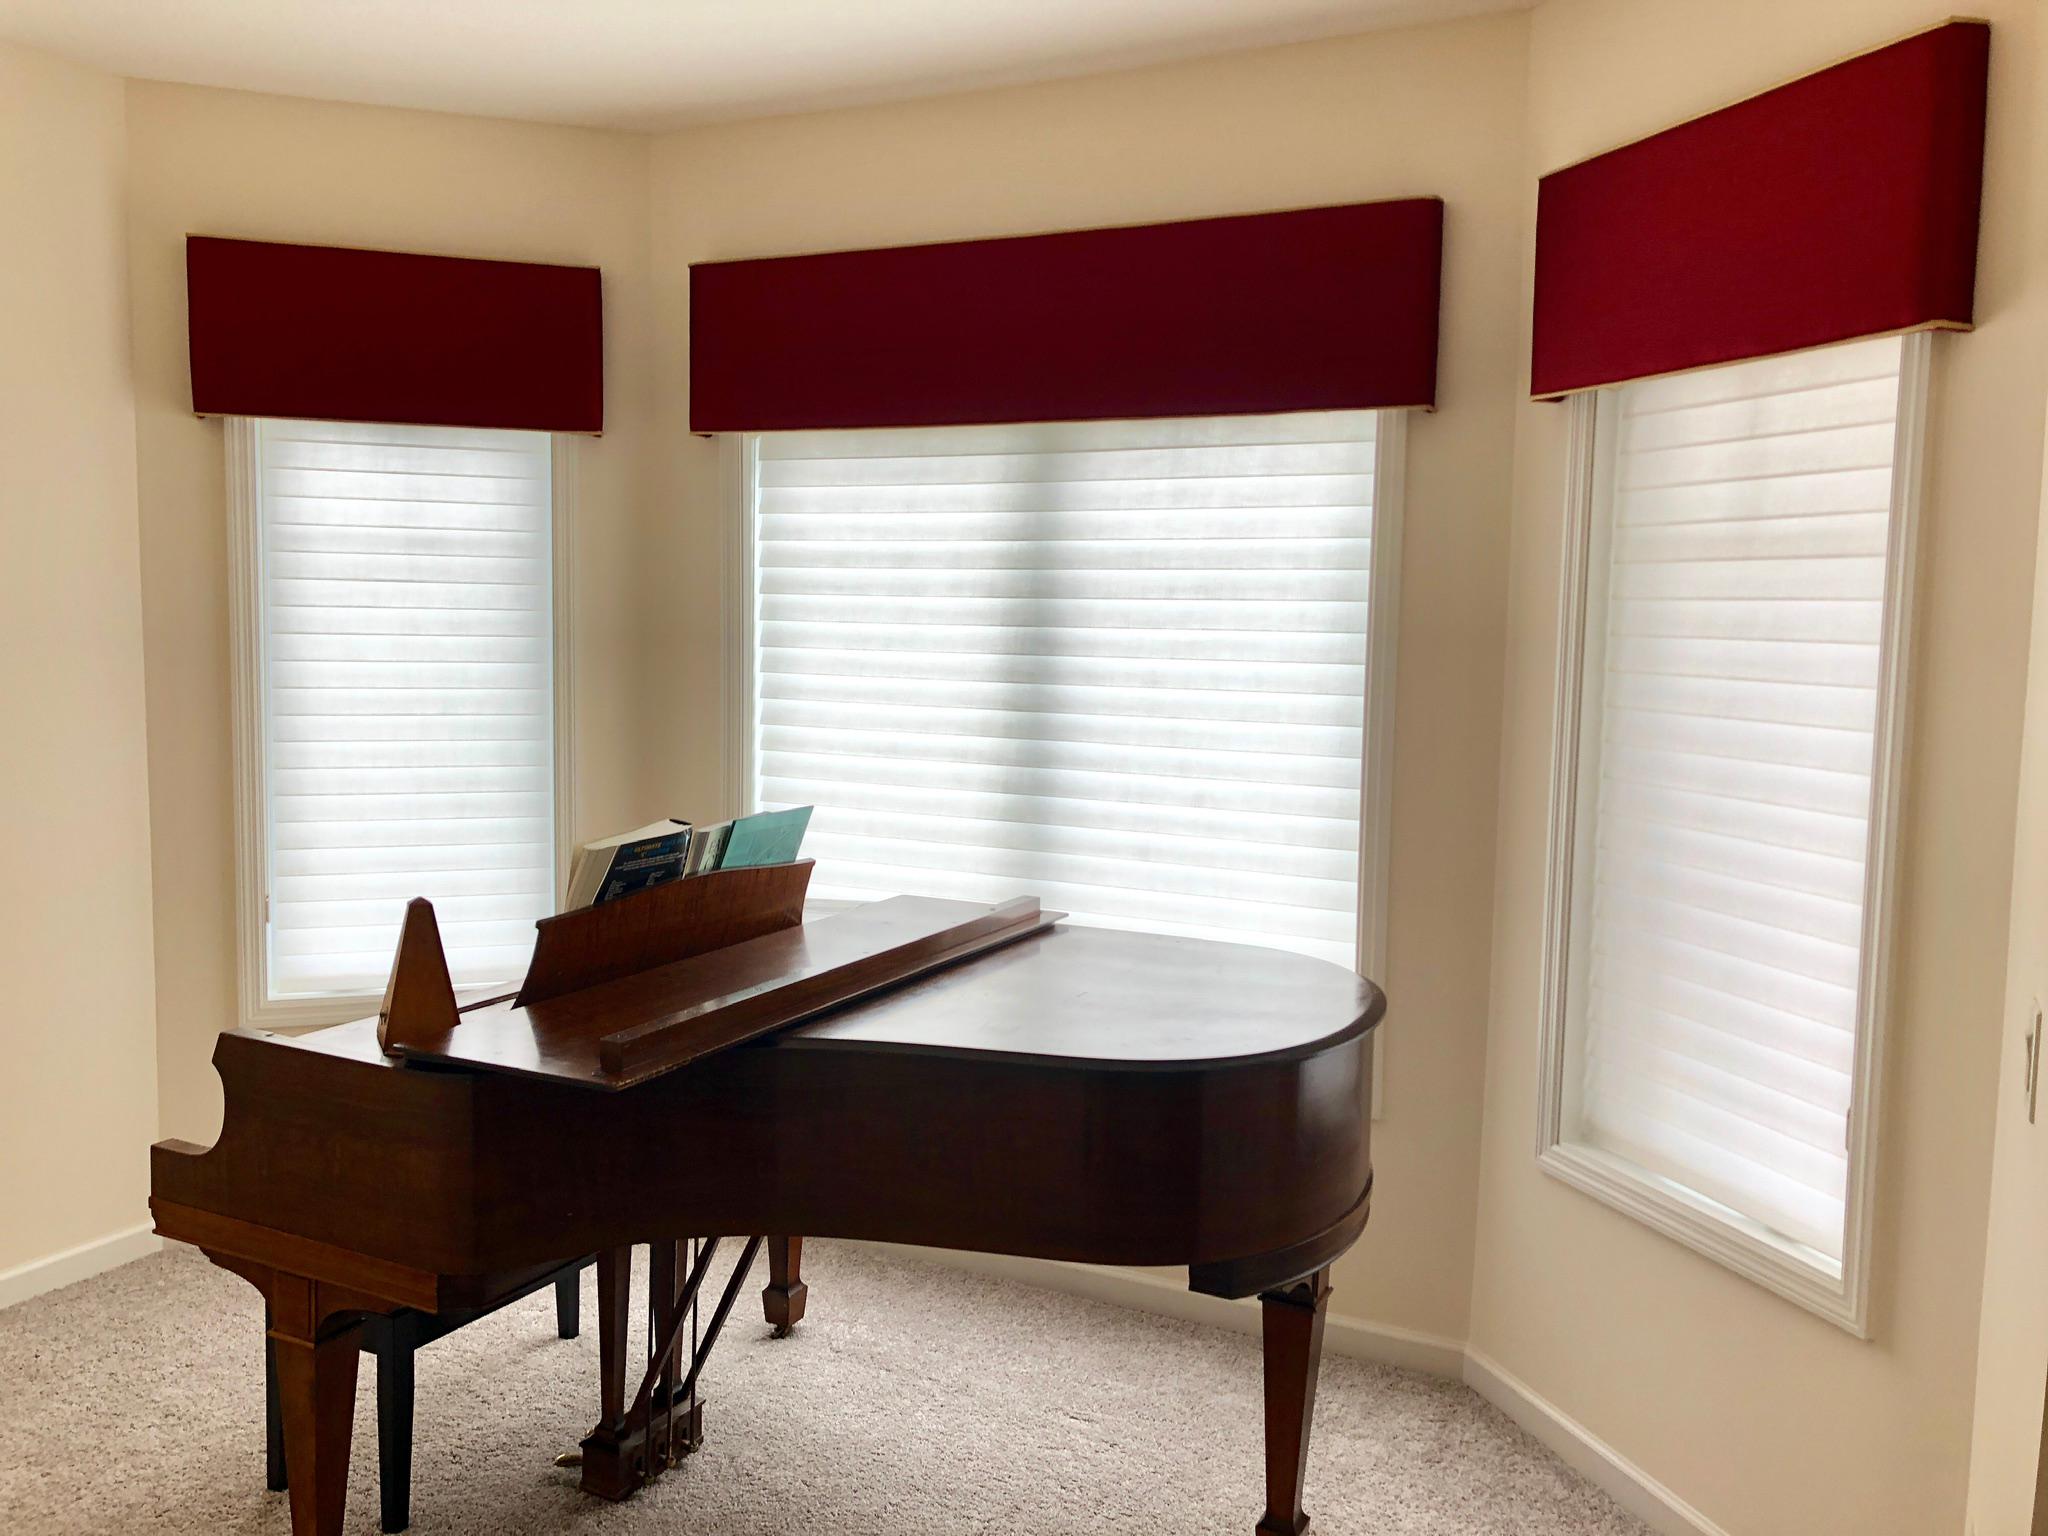 Our Victoria client selected sheer shadings and simple top treatments in a bold color to add a dramatic visual element to this space.